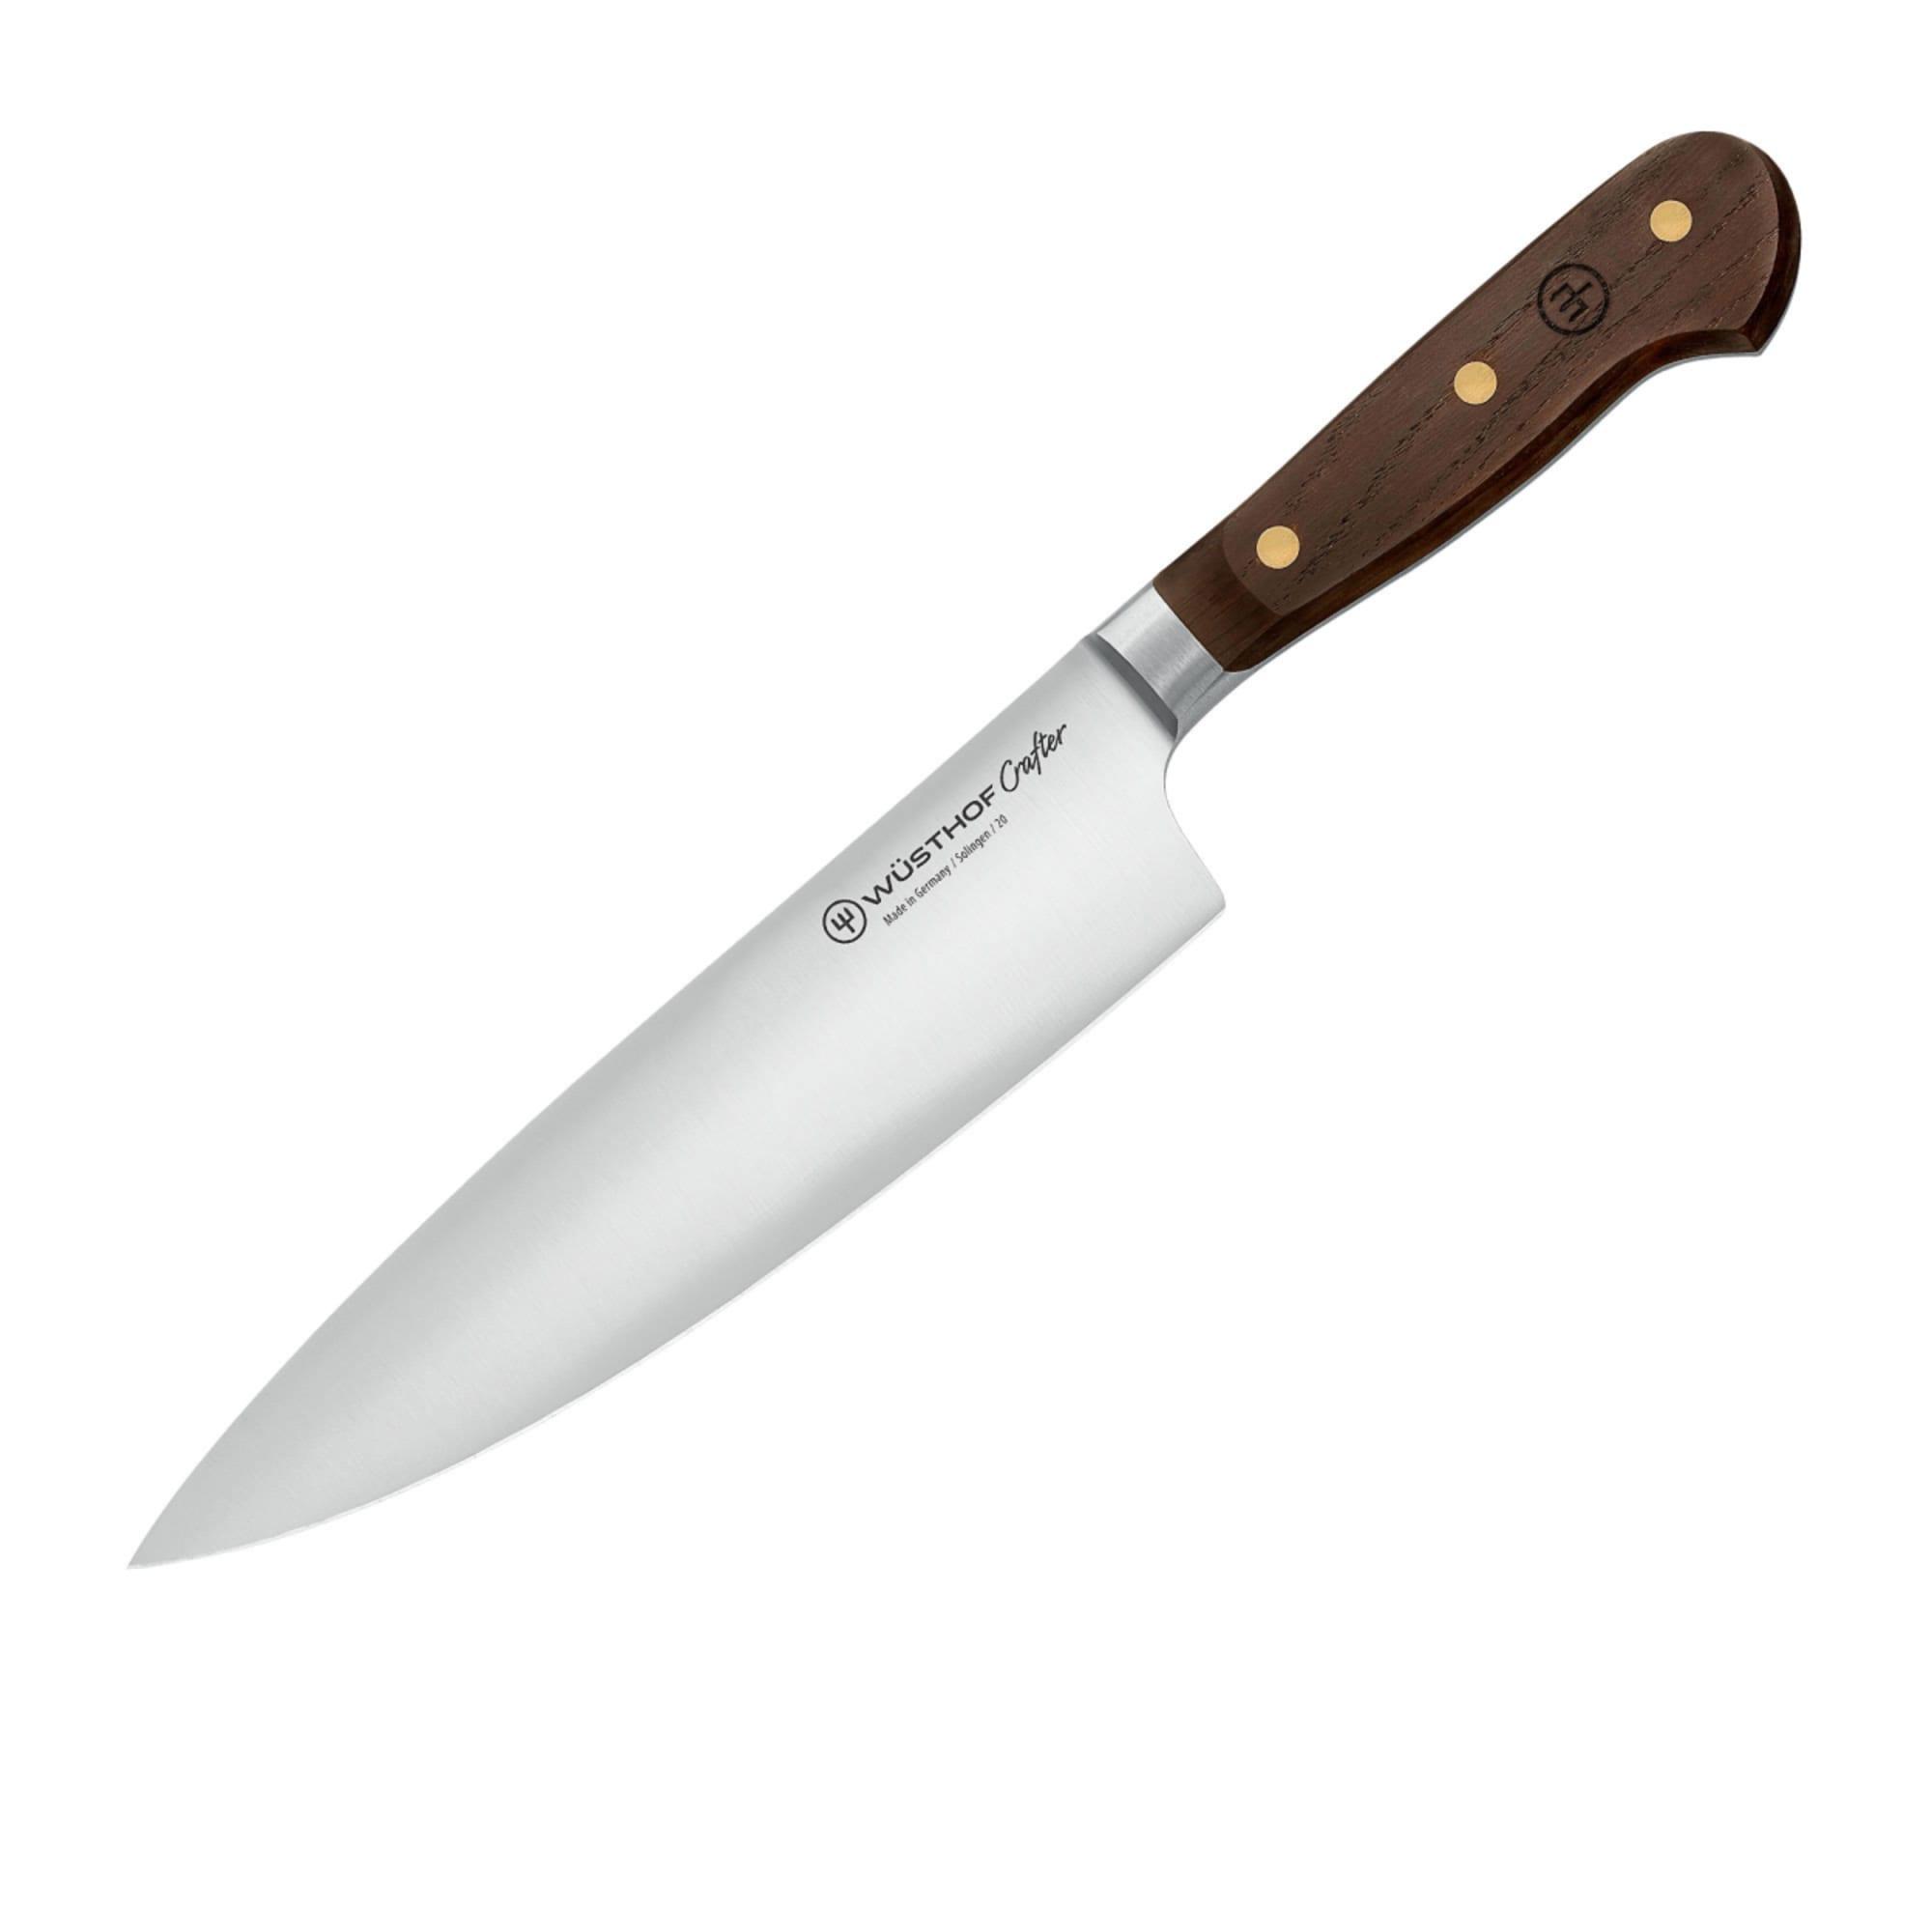 Wusthof Crafter Cook's Knife 20cm Image 1